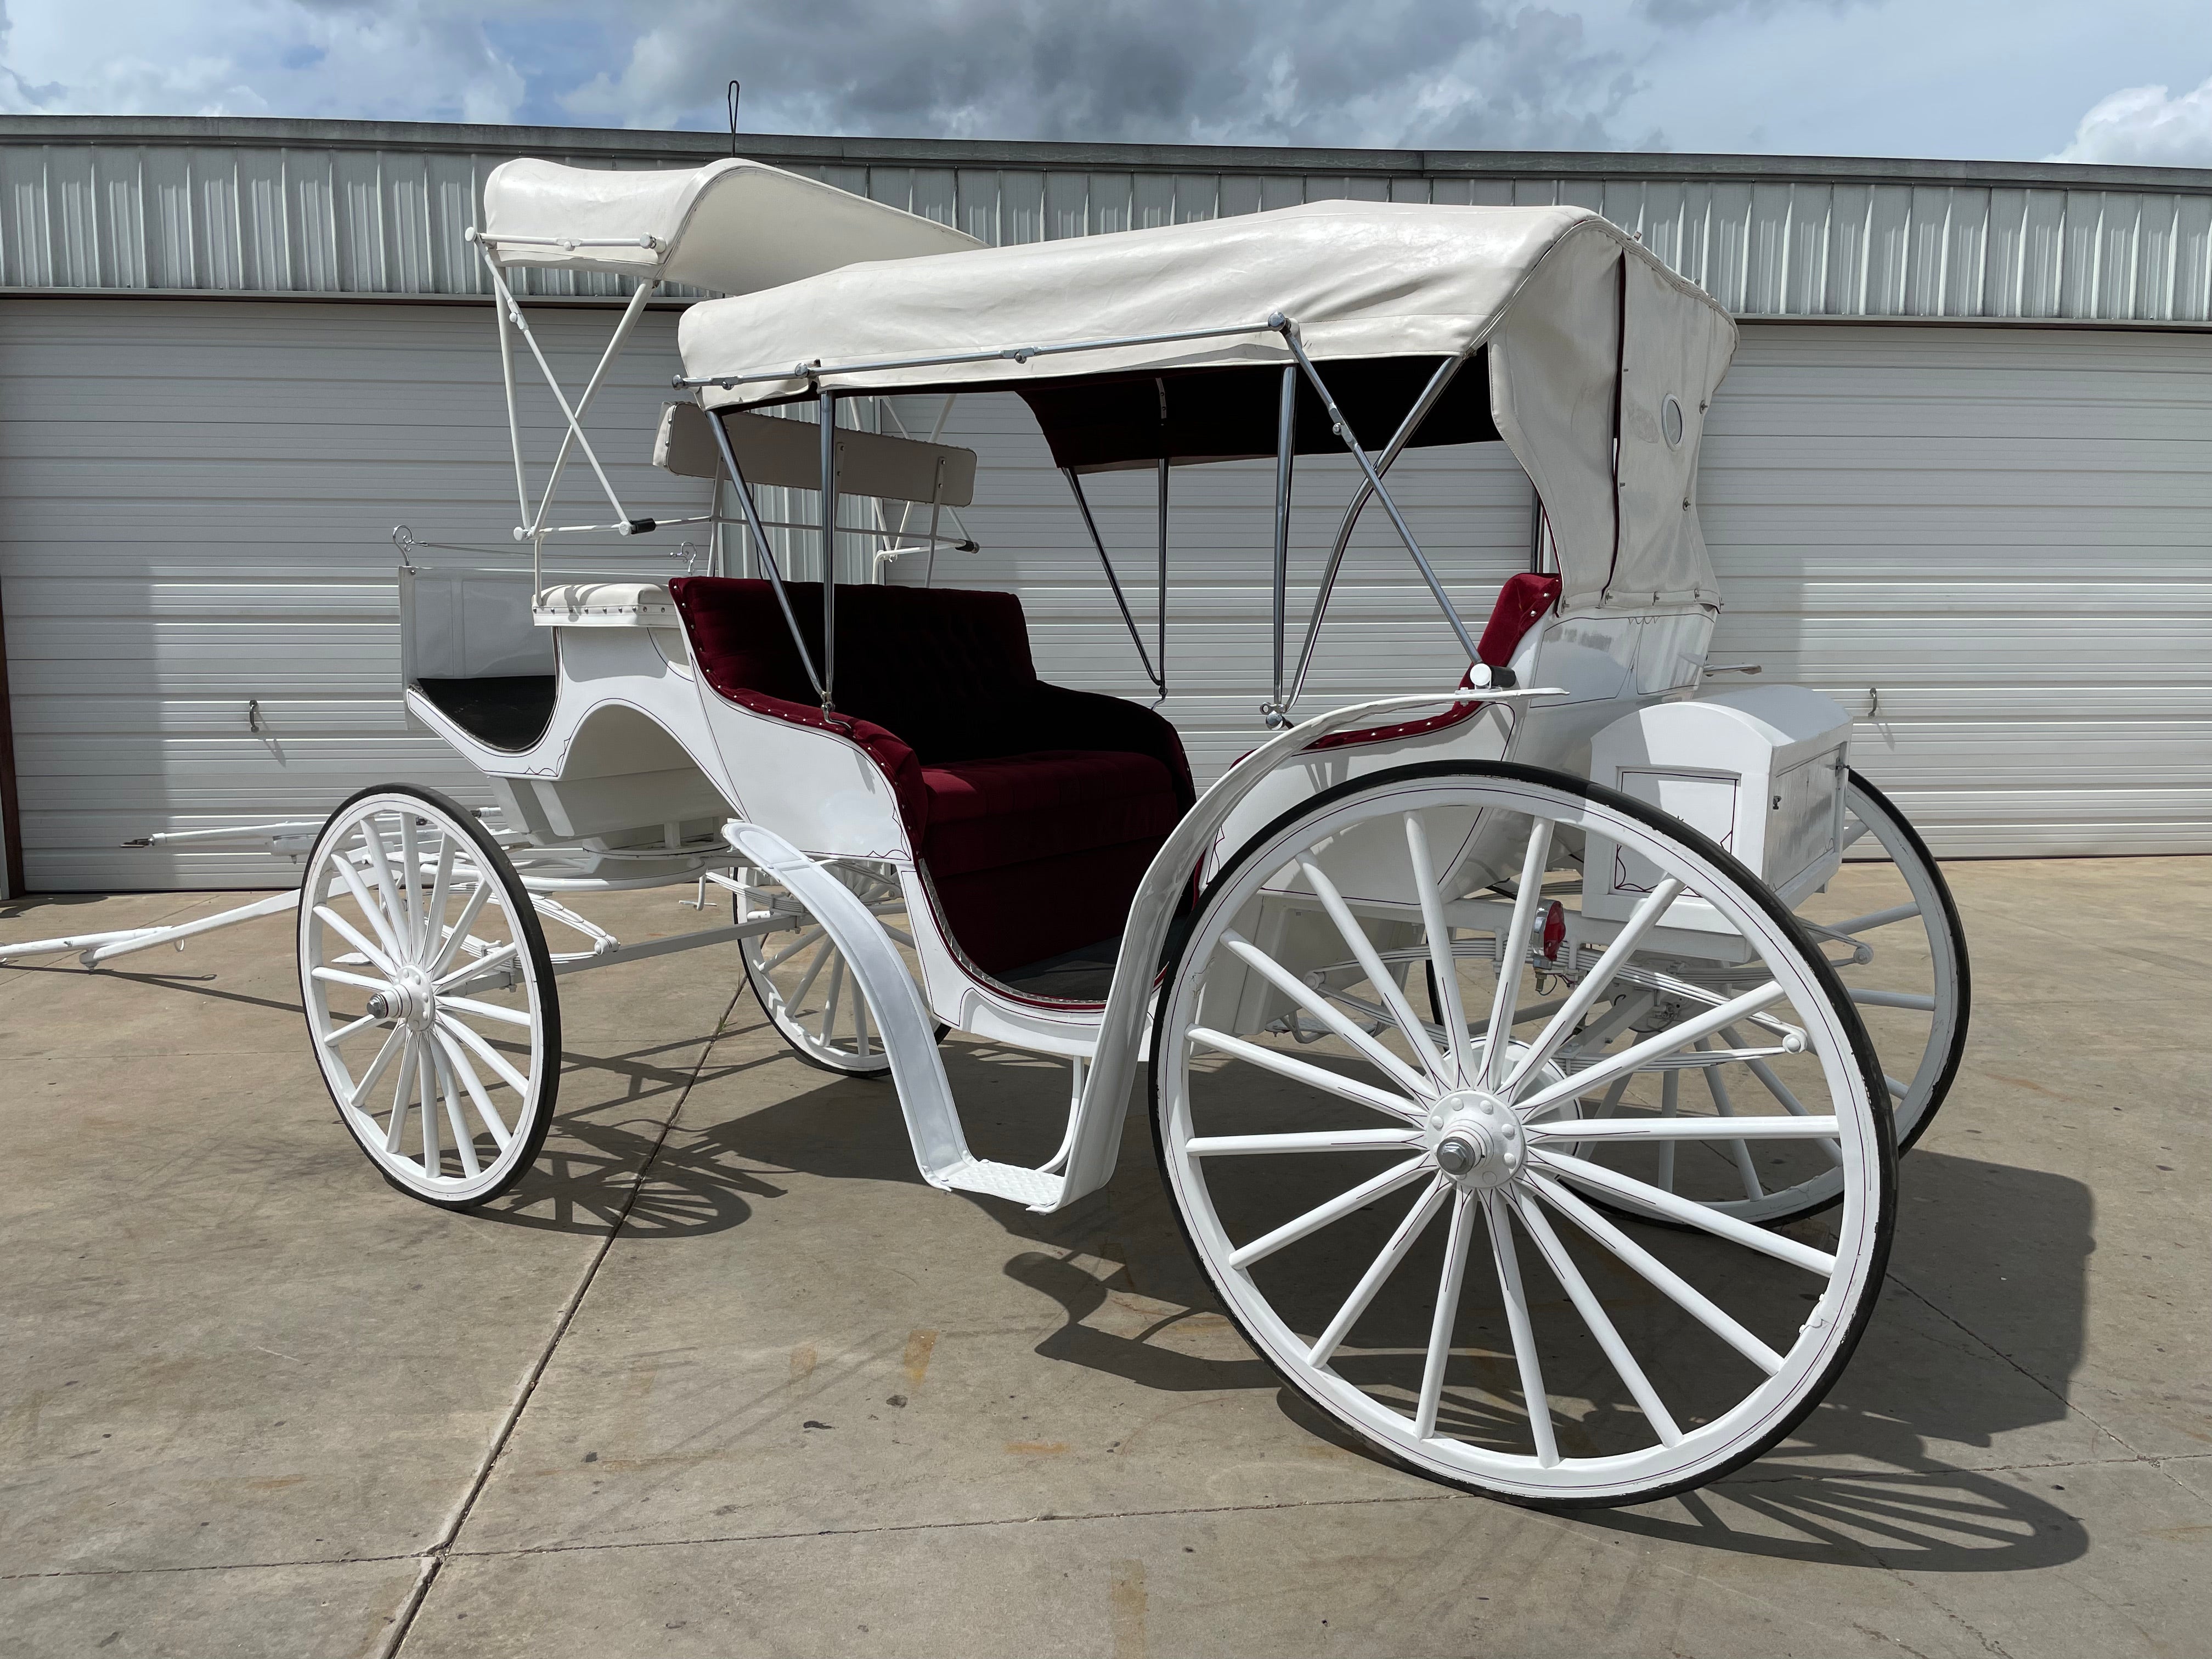 SOLD-Carriage by Yoder Wagon Works